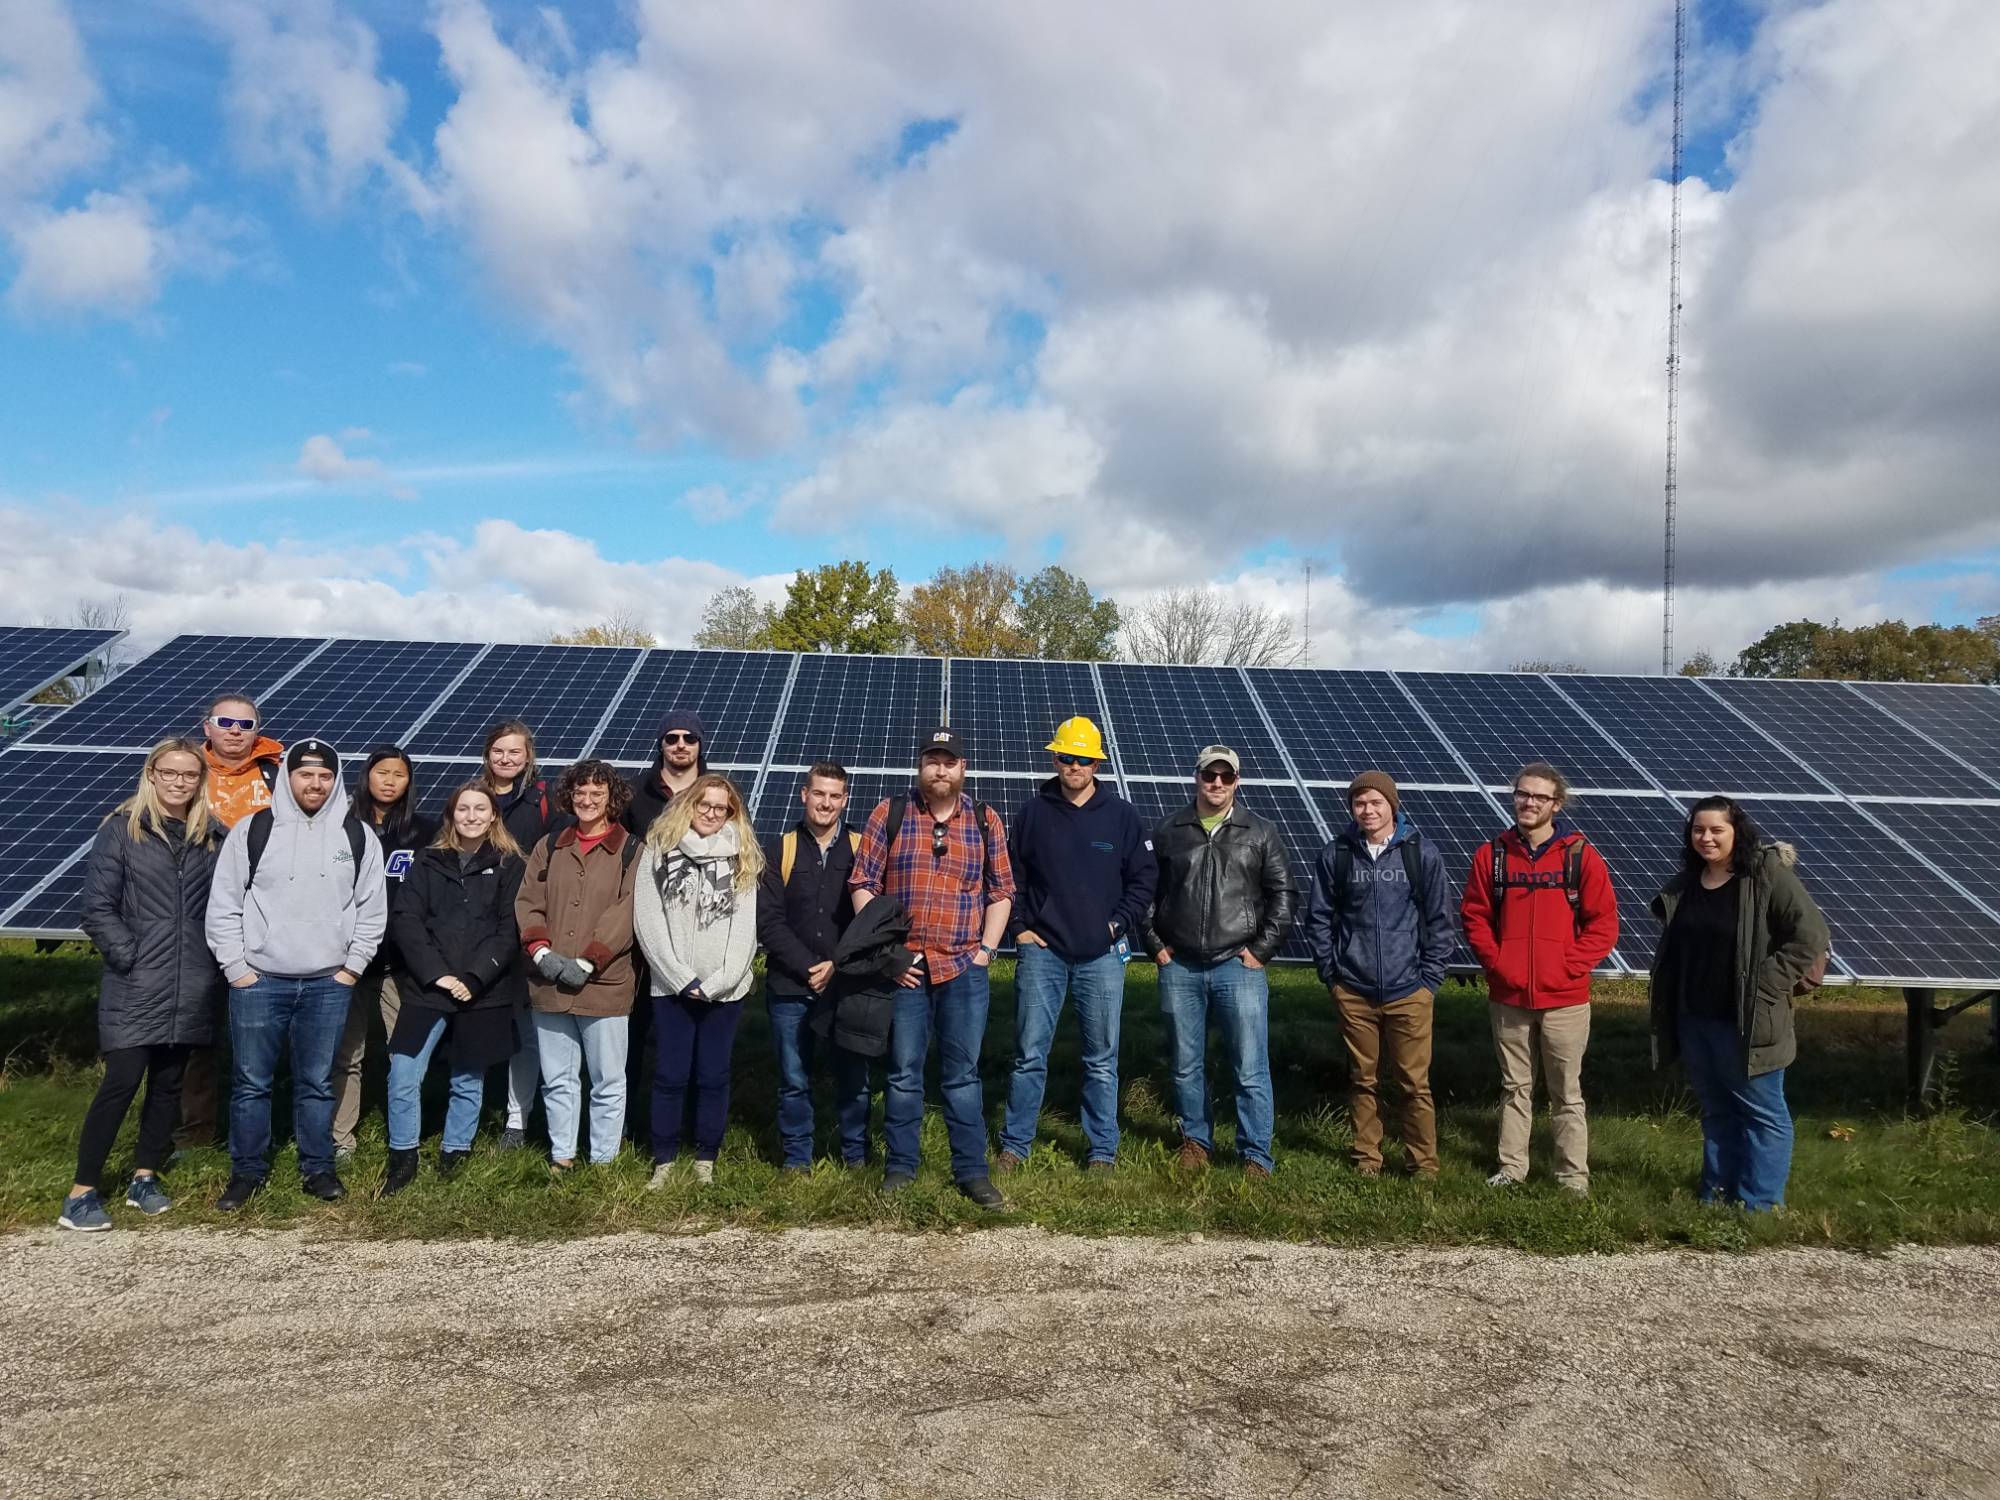 GVSU students standing in front of solar panels